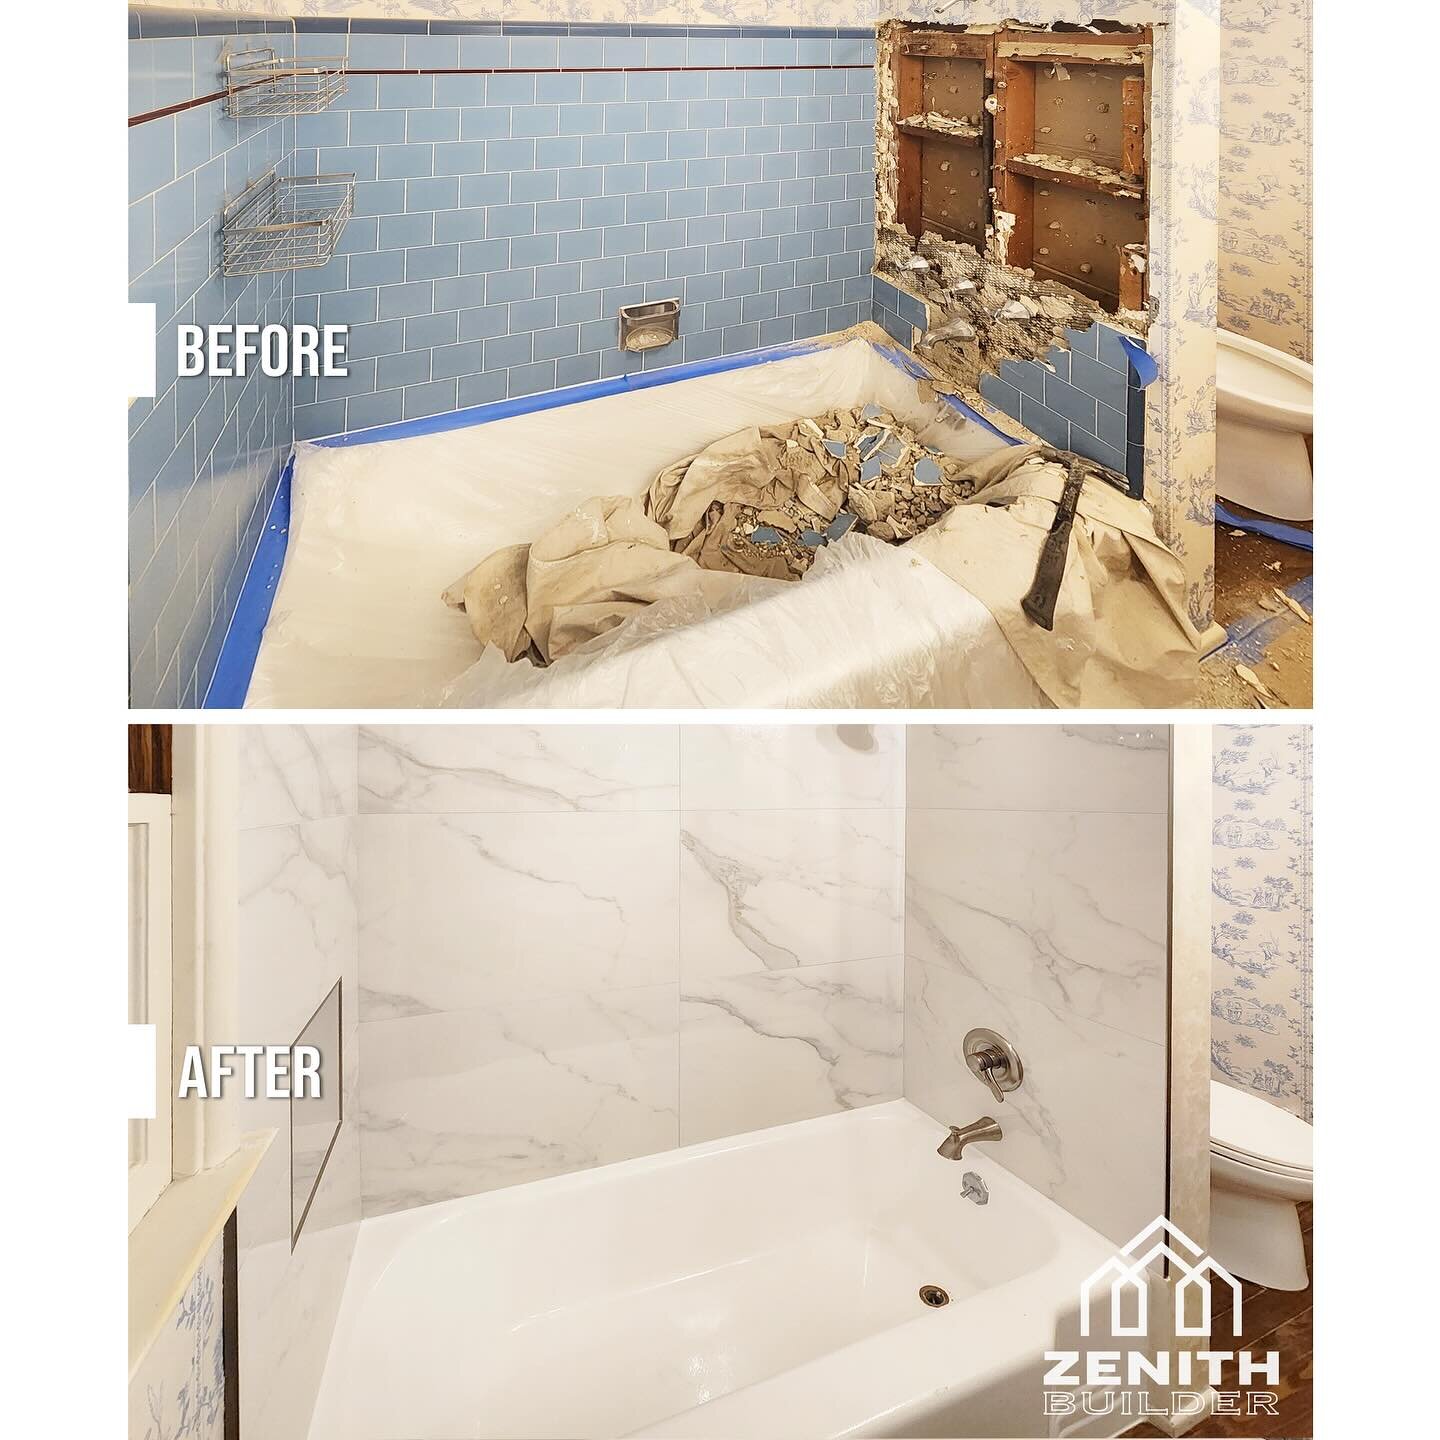 1950s Bathroom Remodel

Transforming a time capsule into a modern oasis! Our 1950s bathroom remodel brings clean lines, minimalist design, and sleek sophistication.